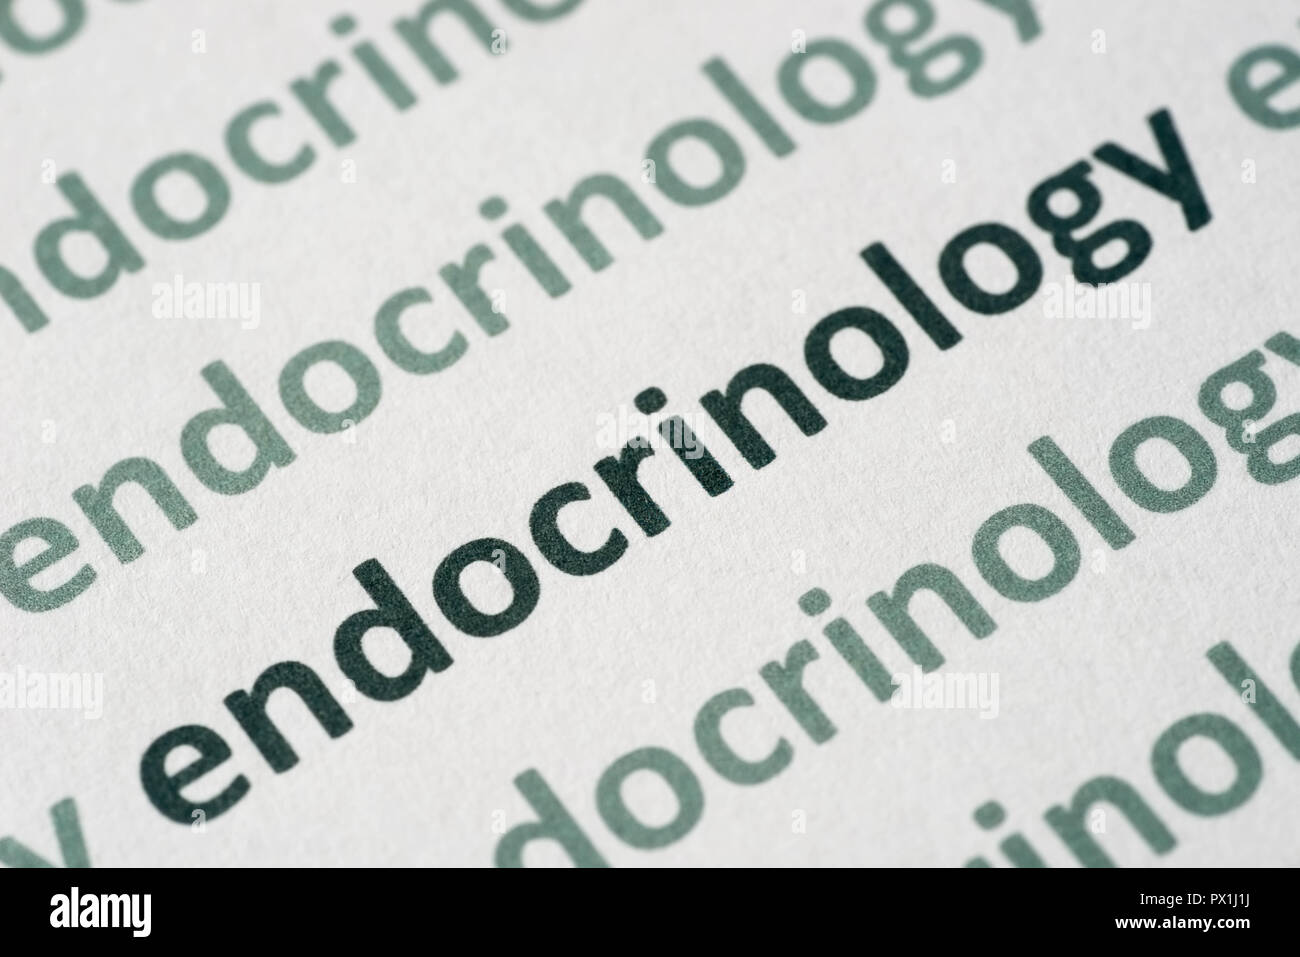 word  endocrinology printed on whte paper macro Stock Photo